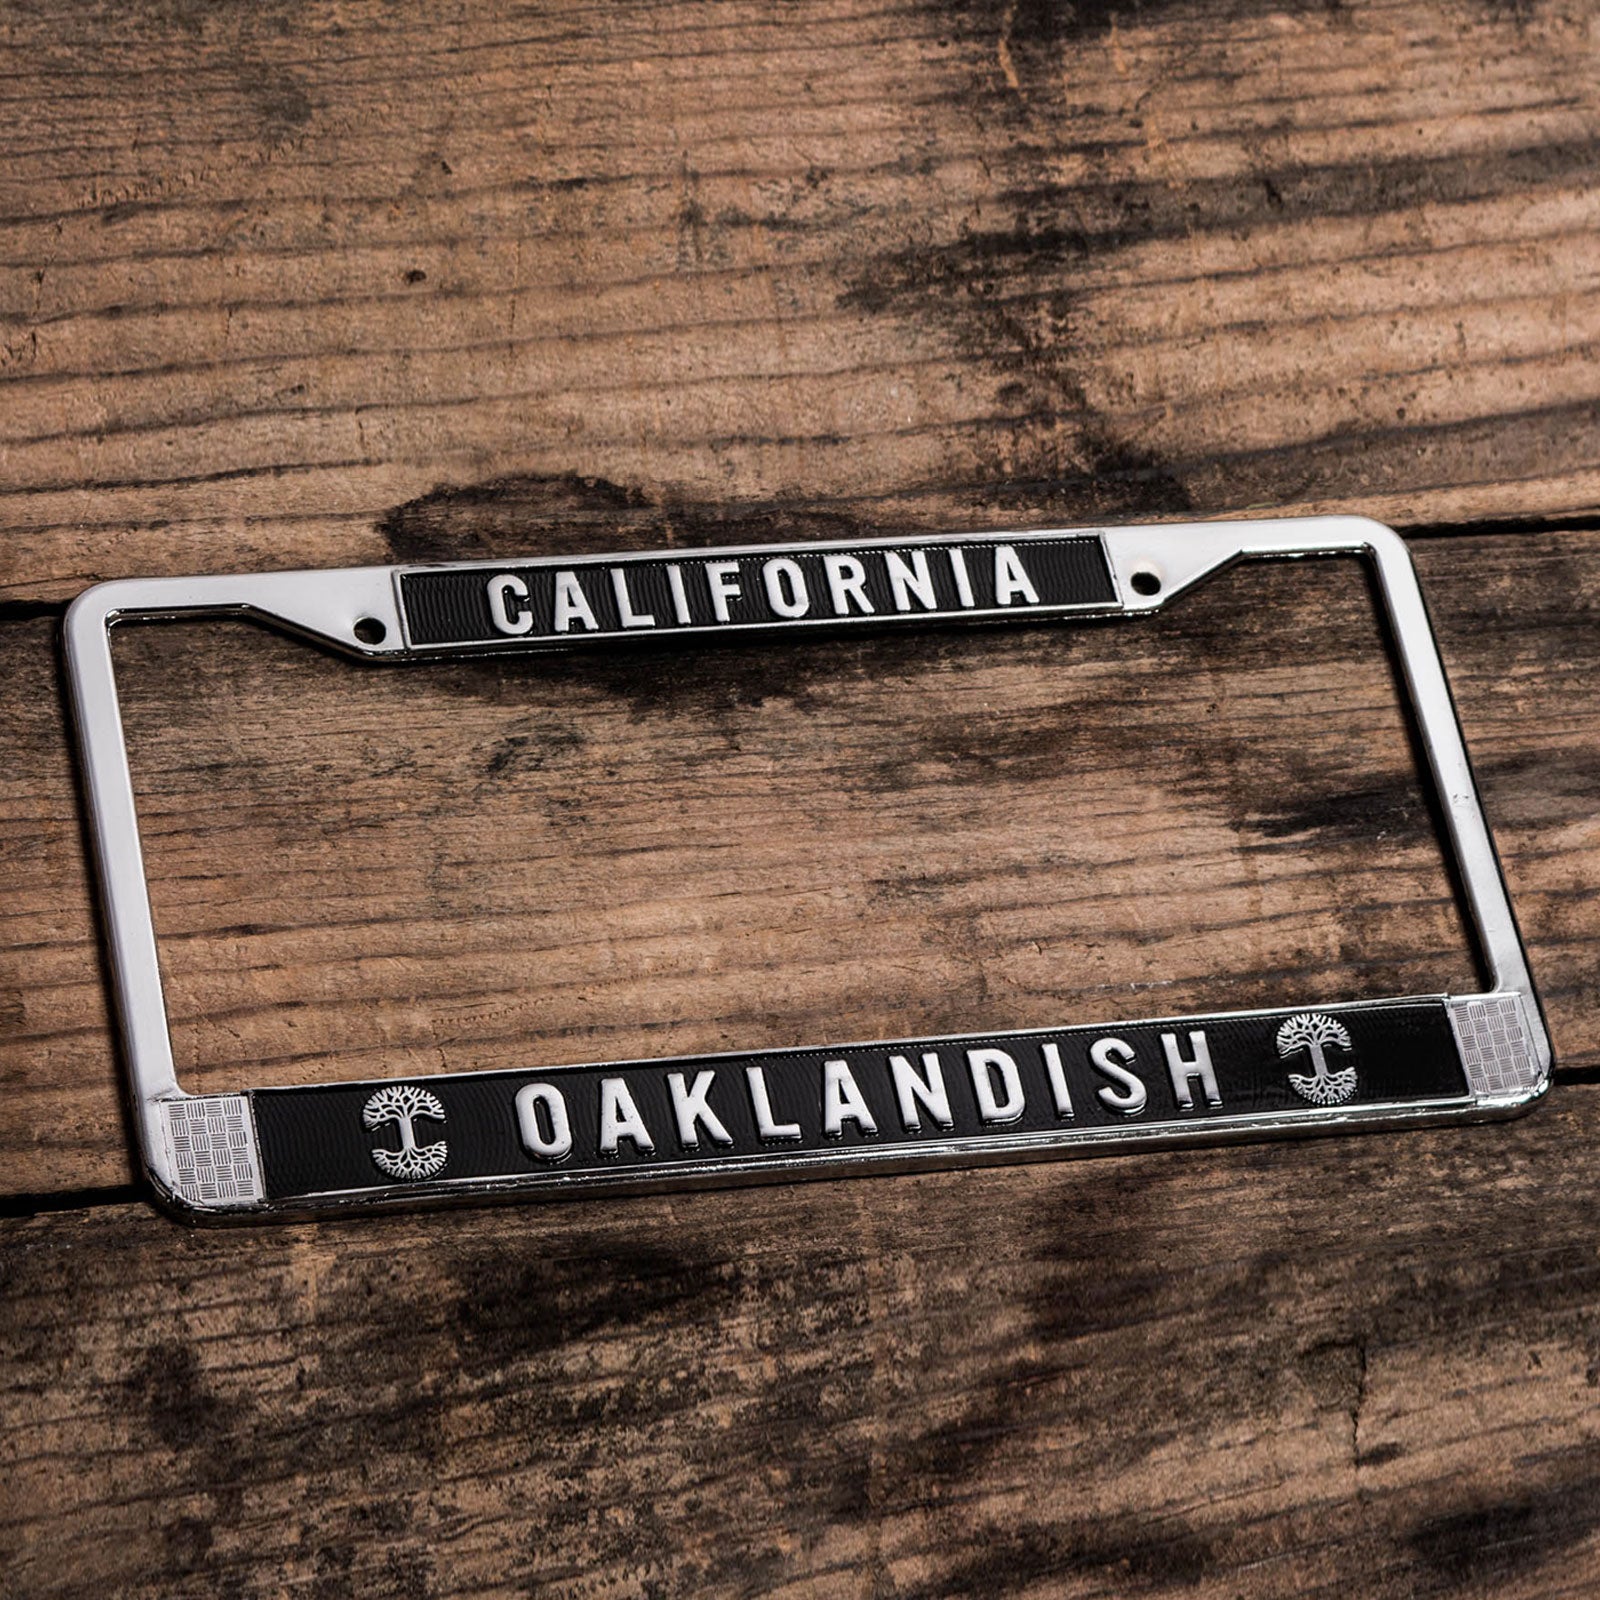 License plate holder with black rims with silver California wordmark on top and Oaklandish wordmark and tree logo on the bottom on wood desk.